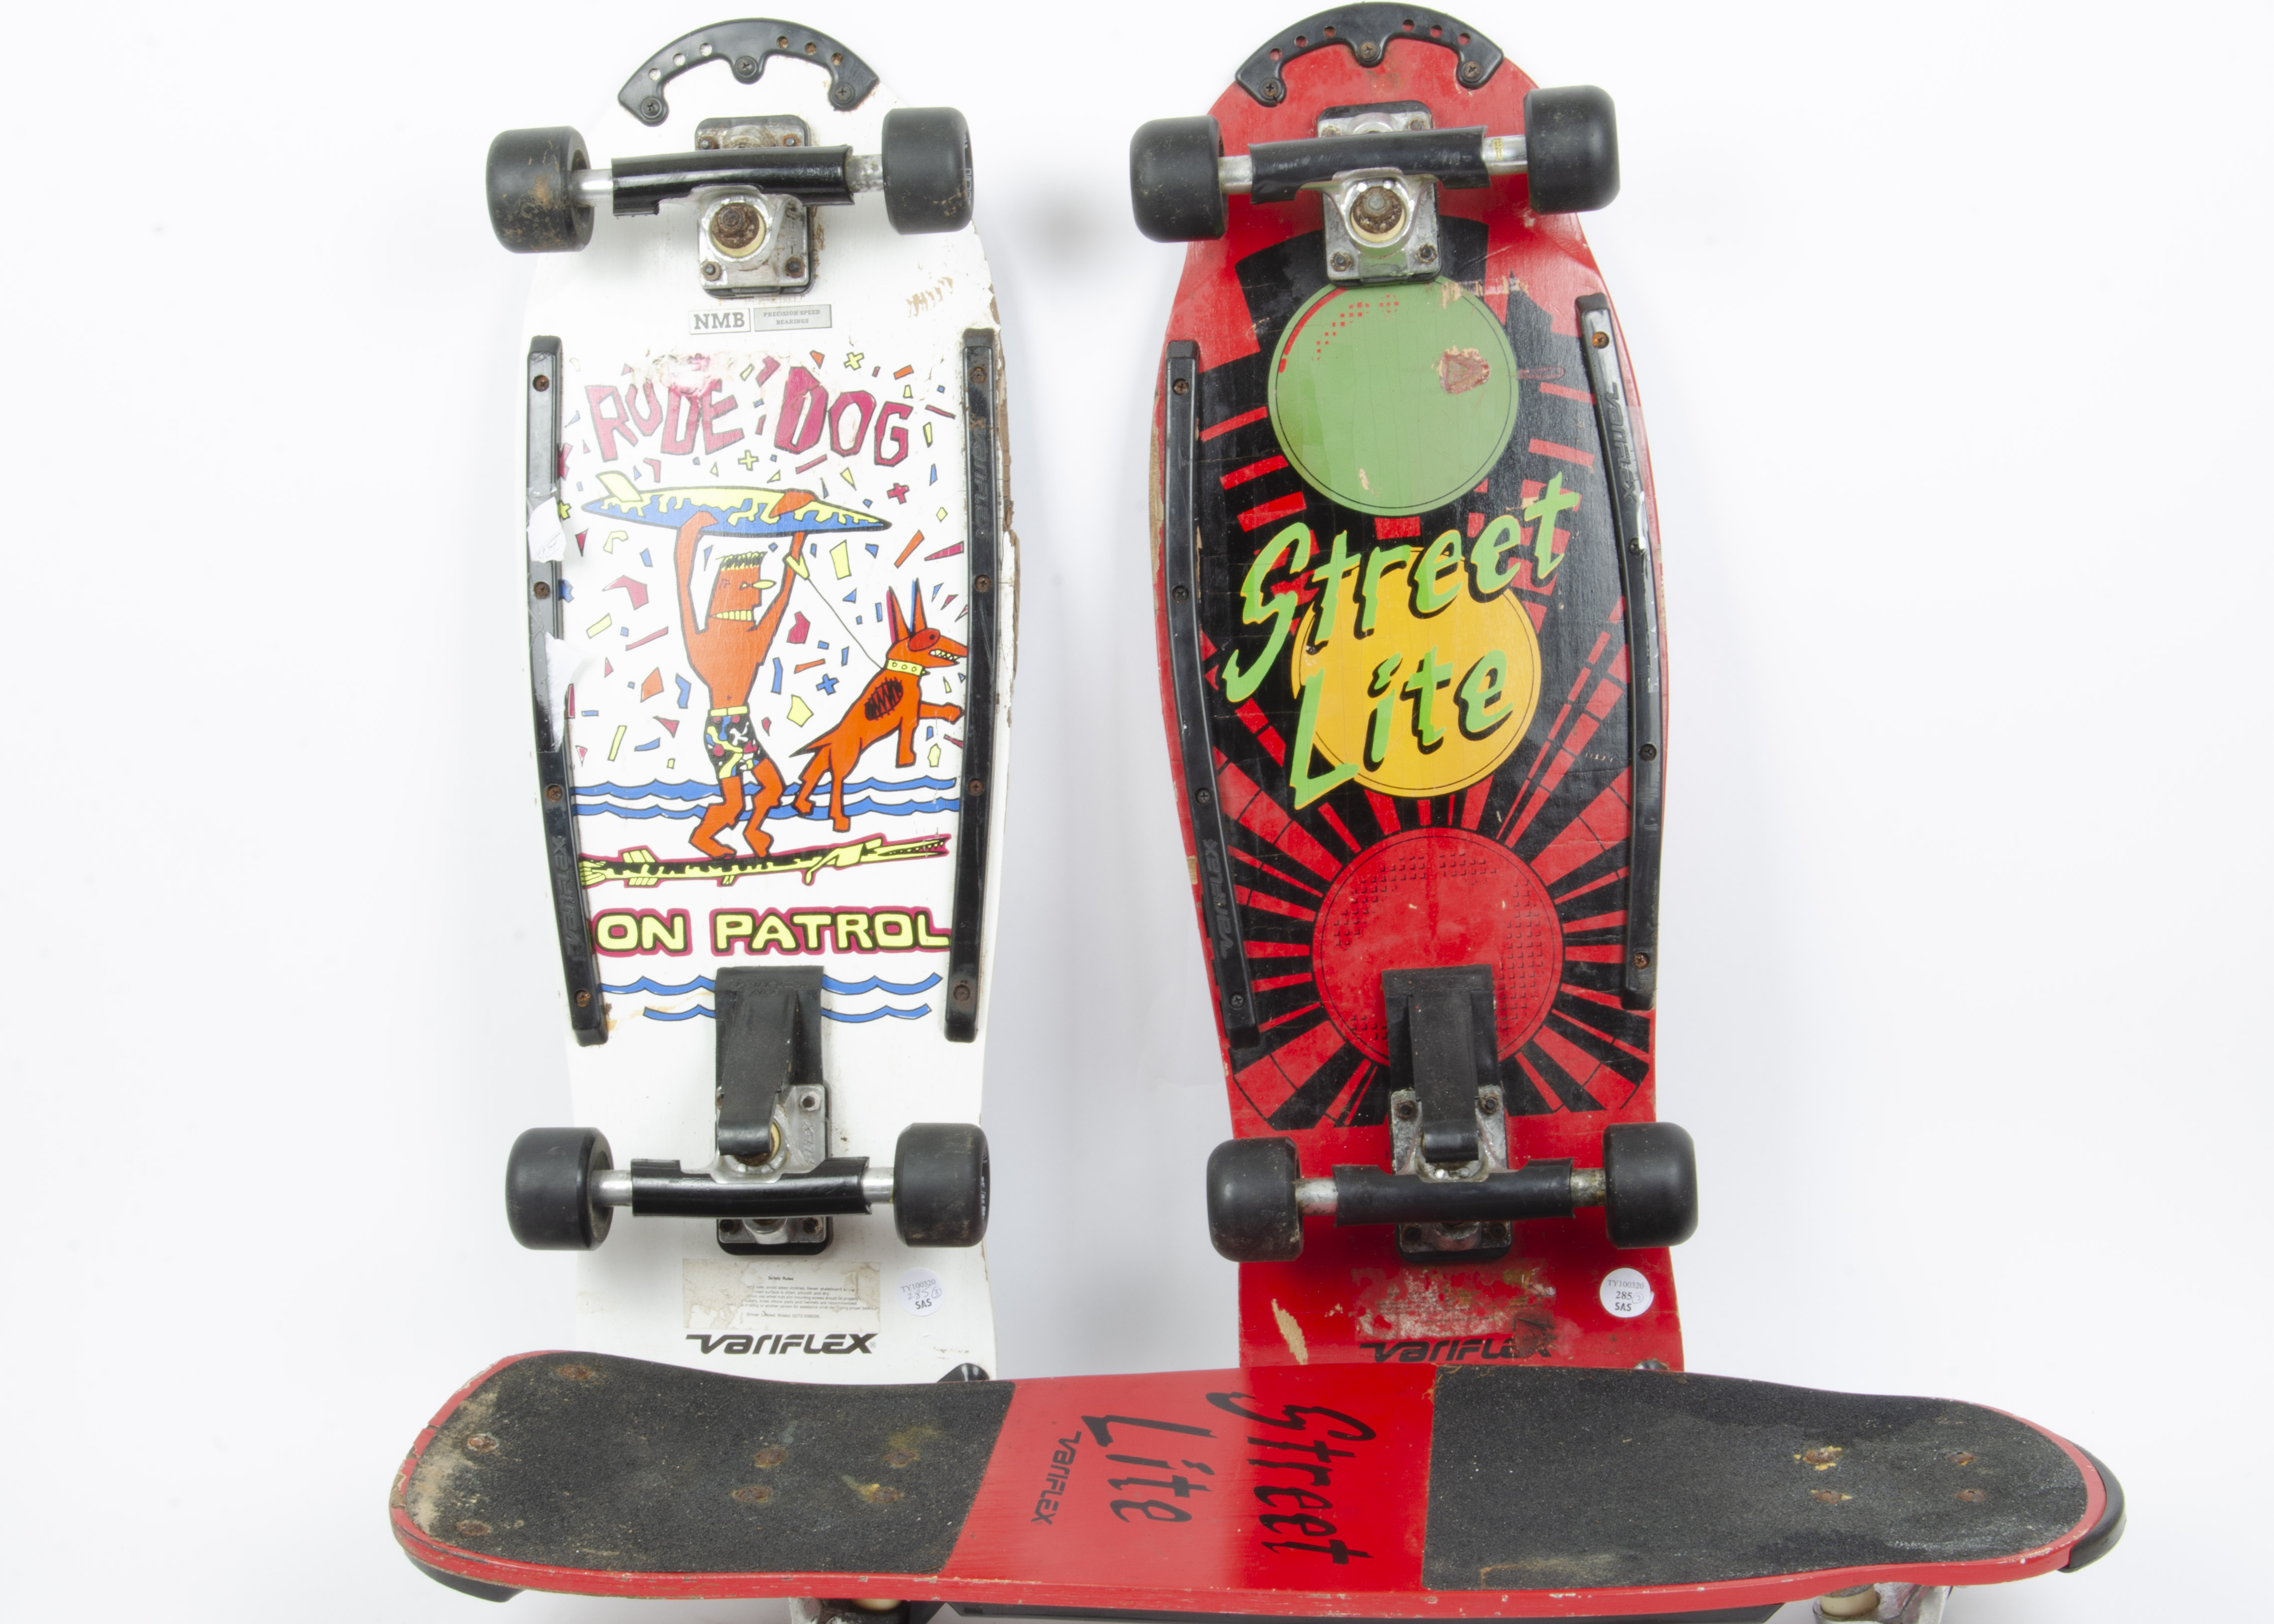 Three Variflex Skateboards, Street Life in red and black (2) and Rude Dog on Patrol in white, F, all